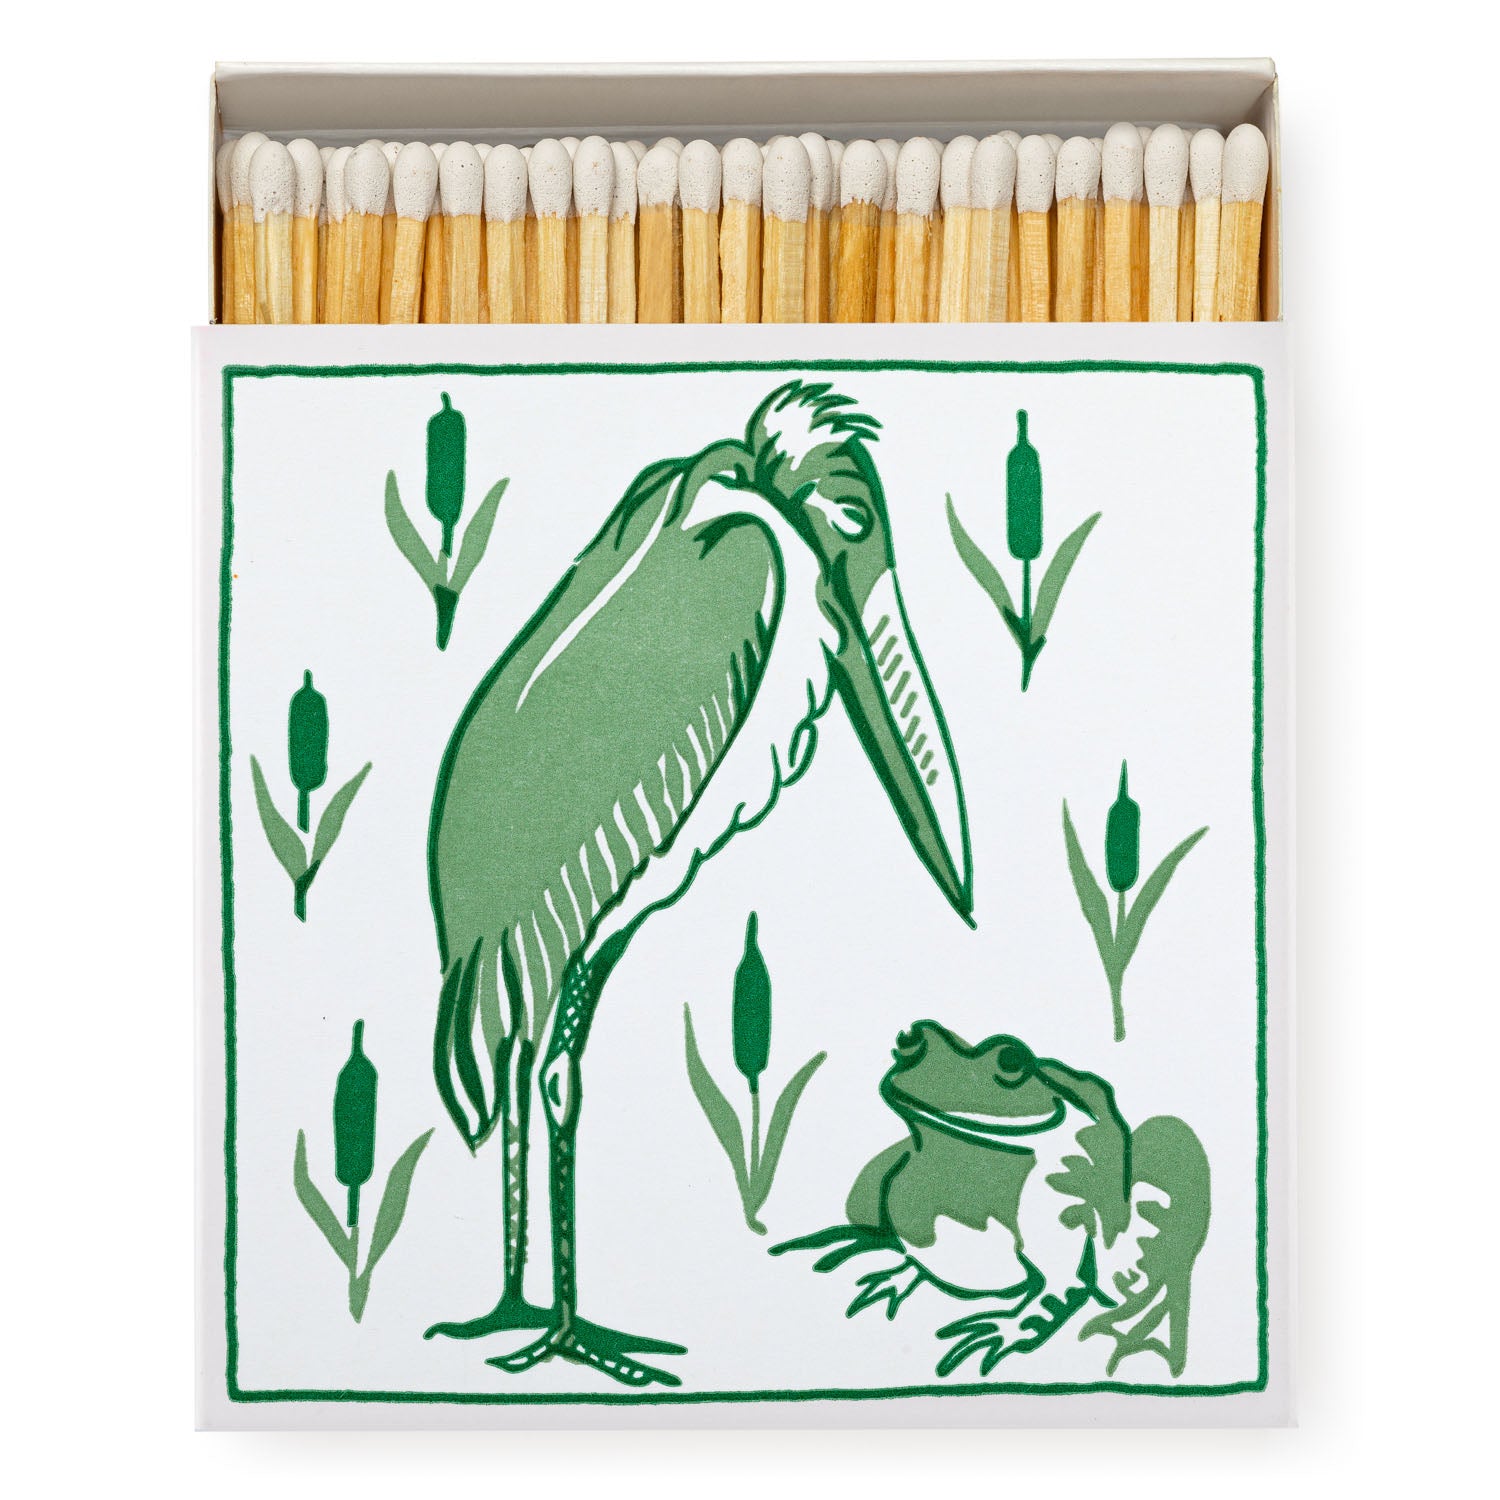 Long Matches - Square Box | Stork and Frog | by Archivist - Lifestory